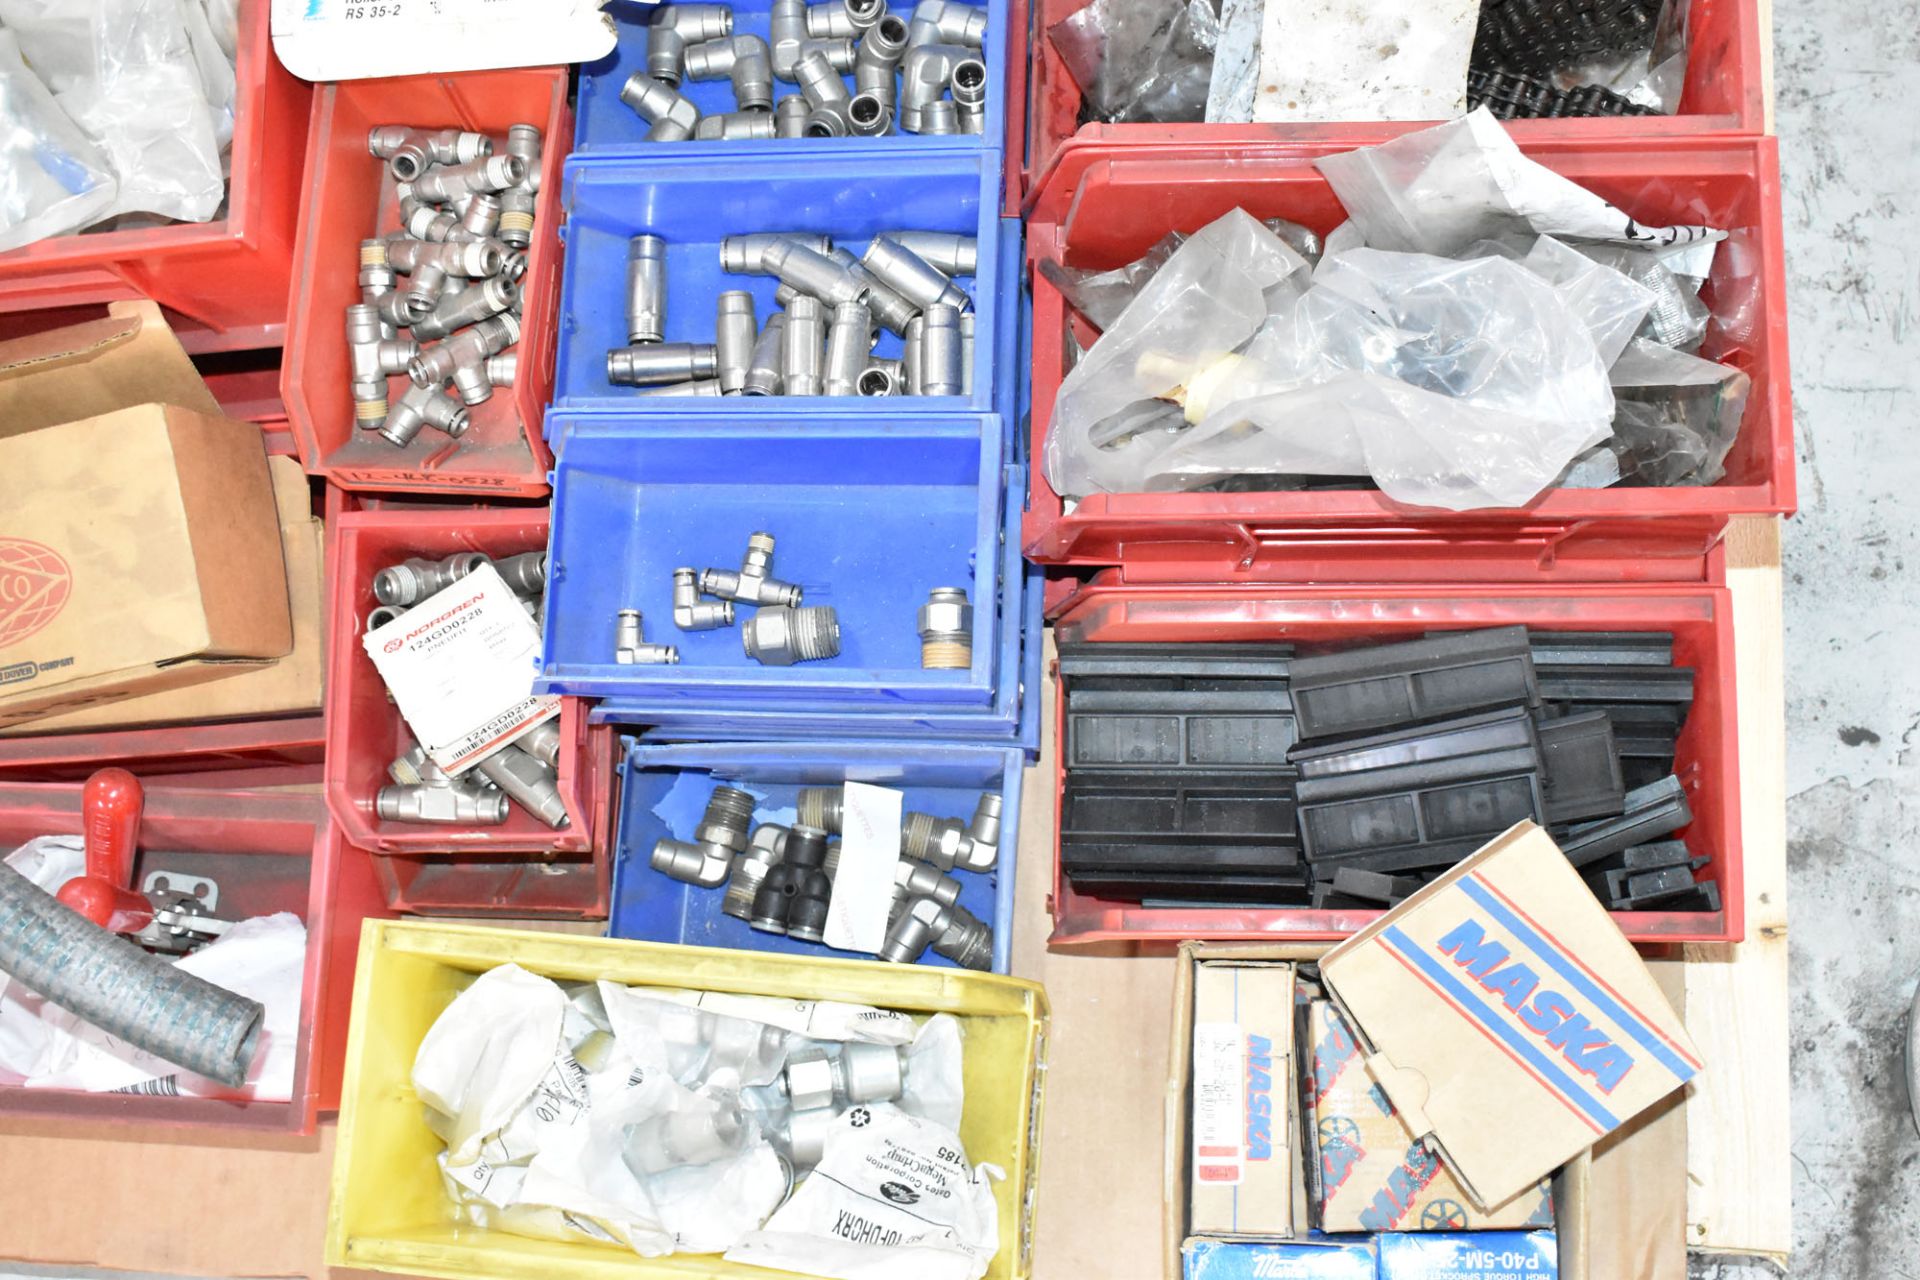 LOT/ PALLET WITH CONTENTS CONSISTING OF HARDWARE, FITTINGS, AND EXTRUDER LINE COMPONENTS [RIGGING - Image 3 of 3